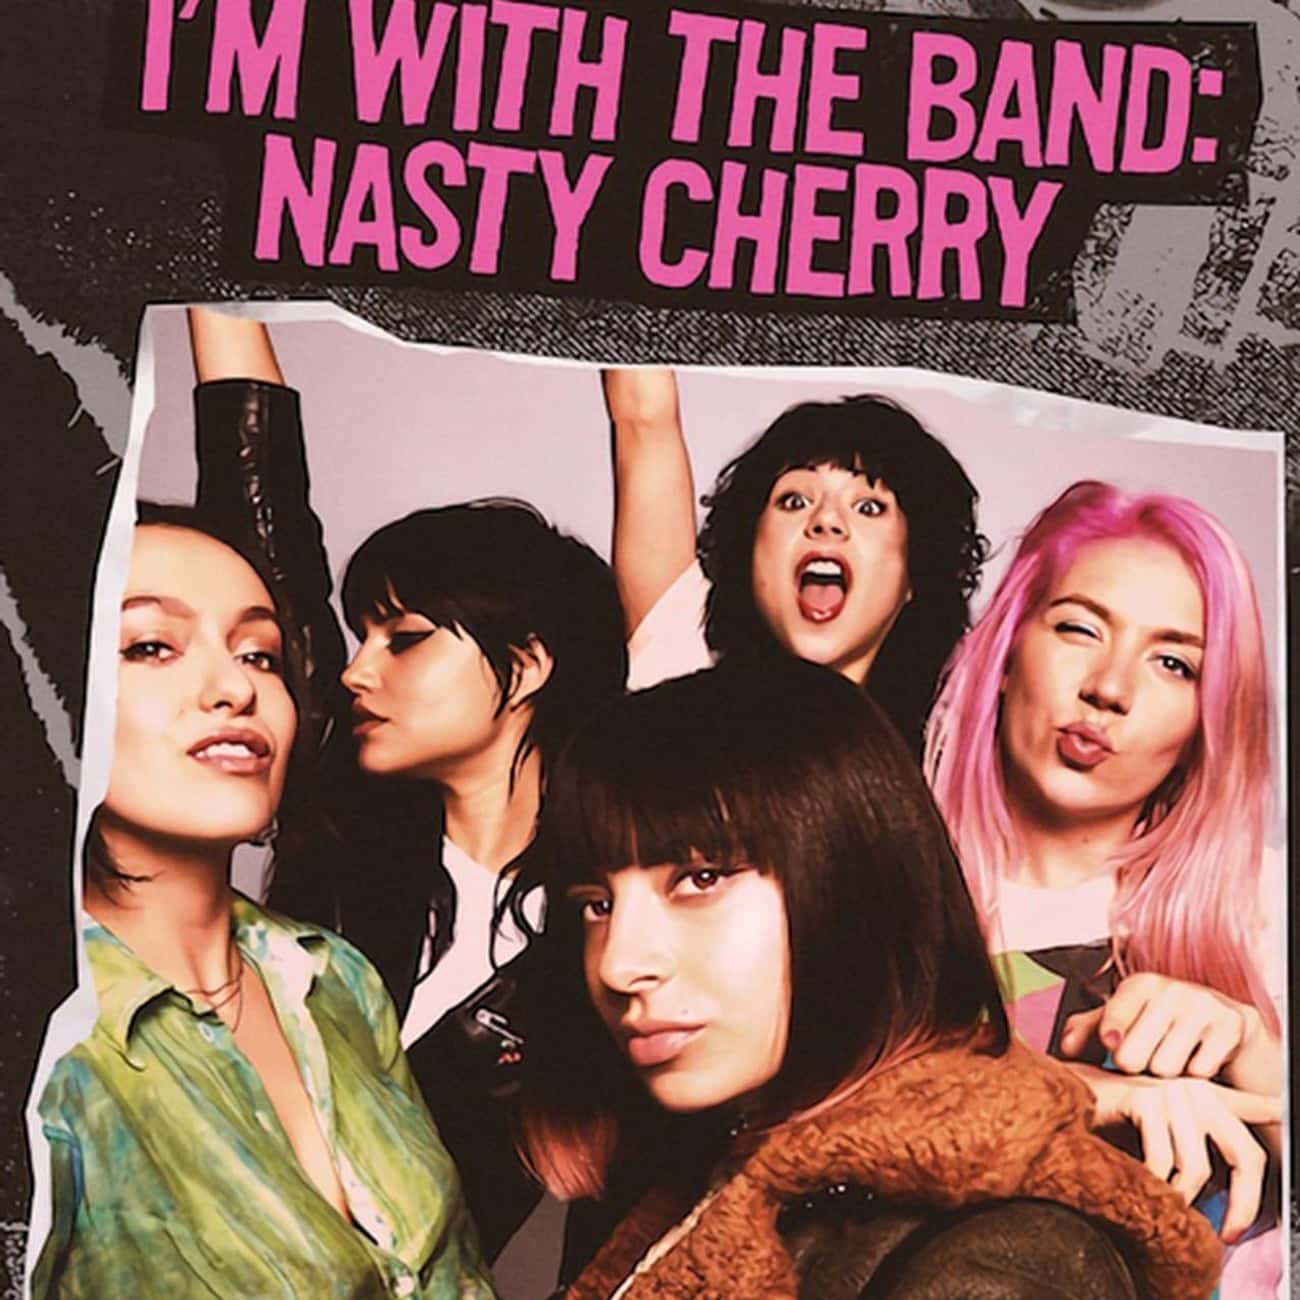 I'm With The Band: Nasty Cherry